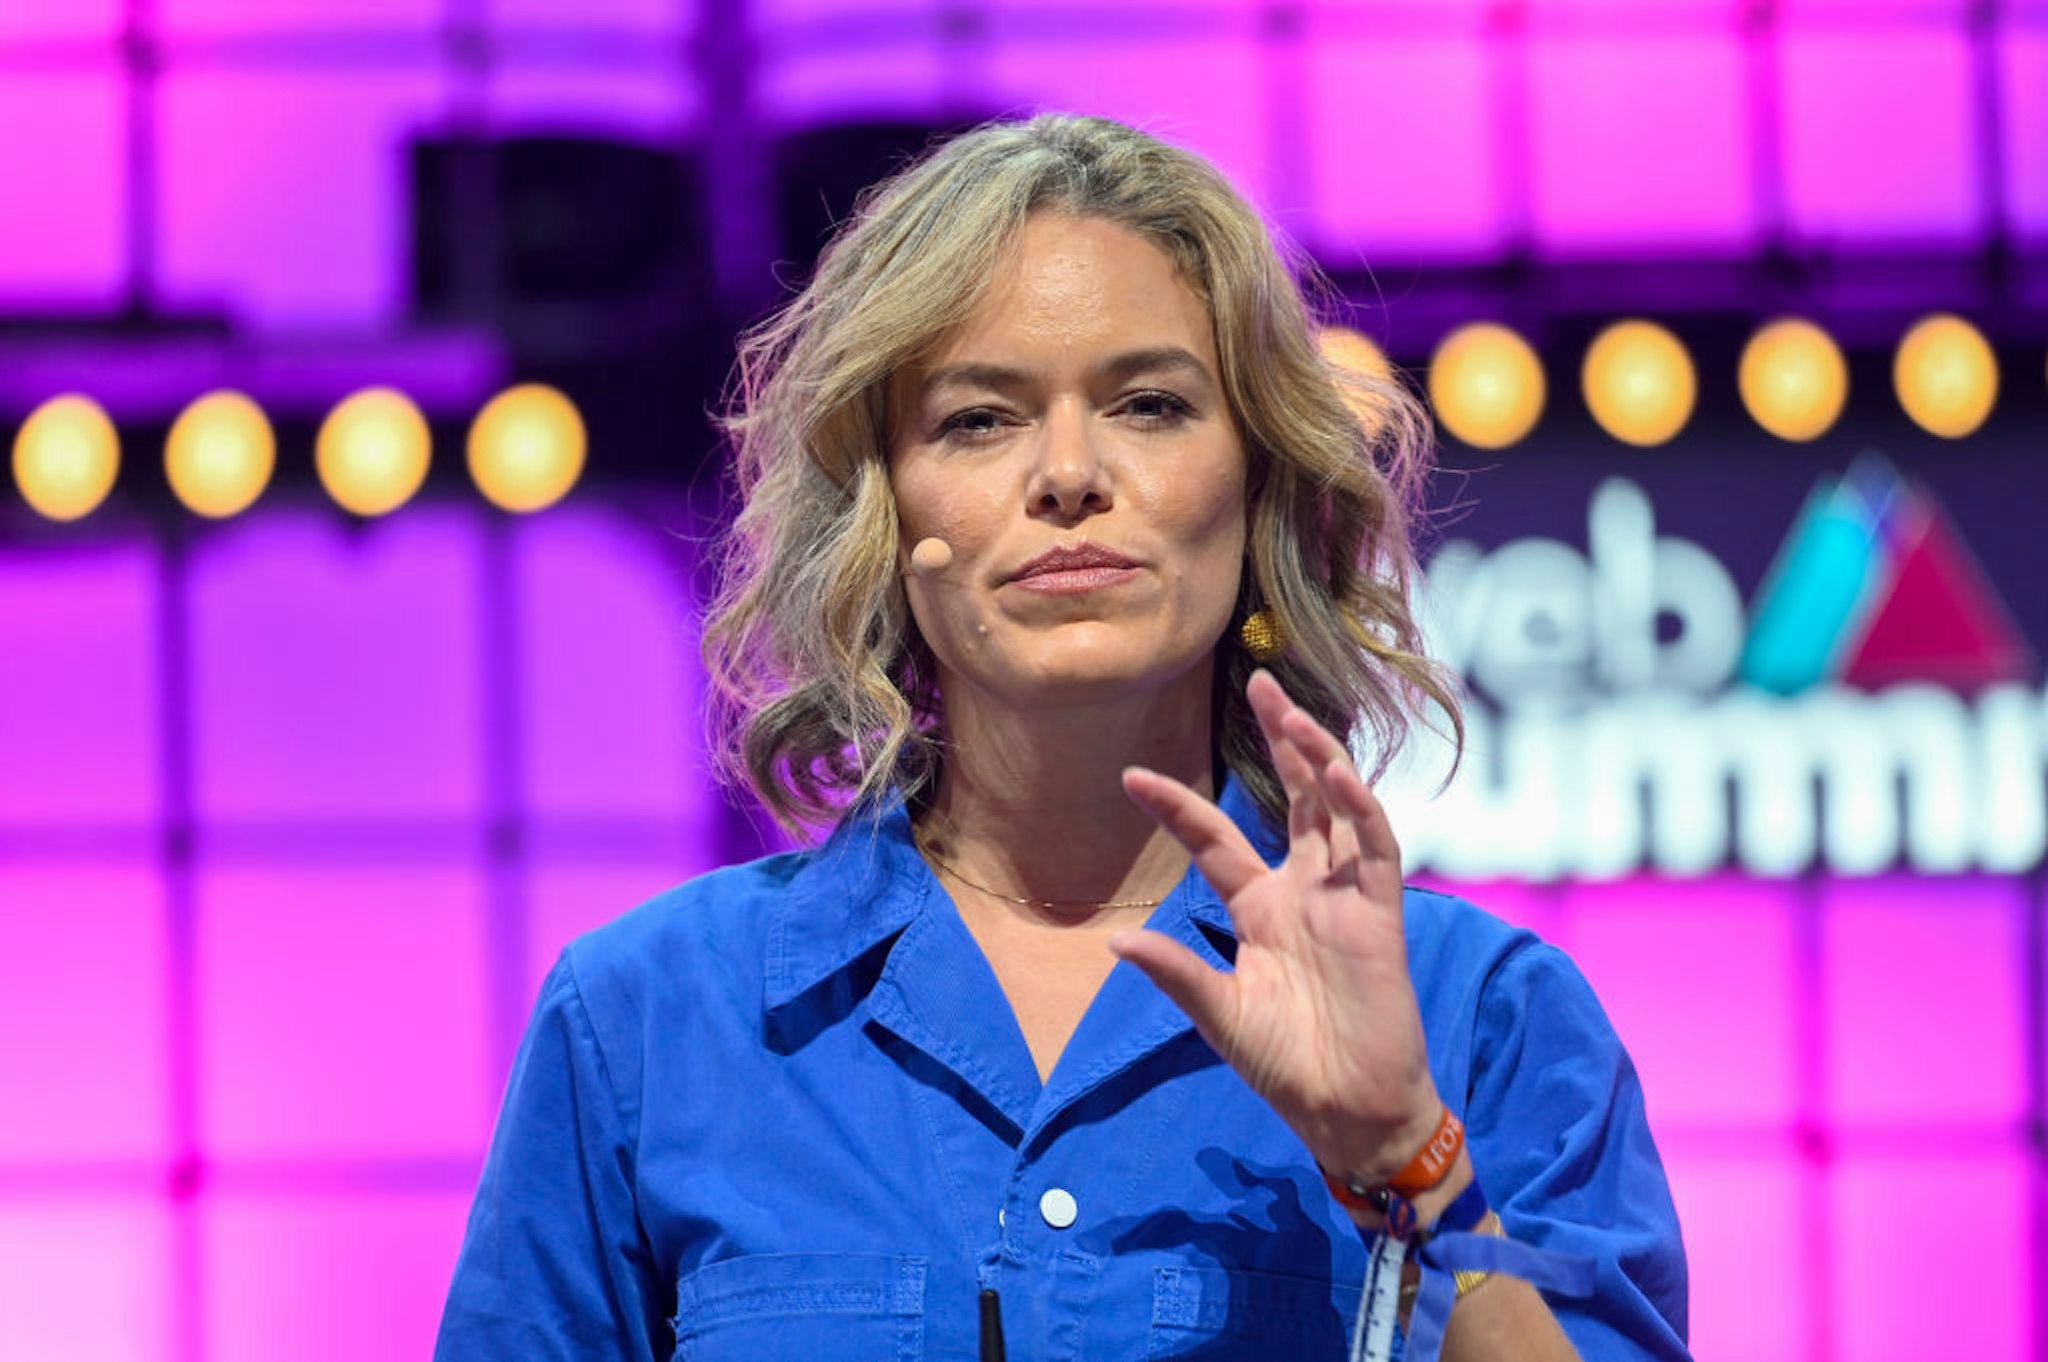 LISBON, PORTUGAL - NOVEMBER 05: Katherine Maher, CEO, Wikipedia, speaks on "The future we build needs to be open" at Center Stage of Web Summit in Altice Arena on November 05, 2019 in Lisbon, Portugal. Web Summit is an annual technology conference which brings together a variety of technology companies to discuss the future of industry. This year’s event runs from November 4- 7 and is expected to attract around 70,000 participants. (Photo by Horacio Villalobos#Corbis/Corbis via Getty Images)